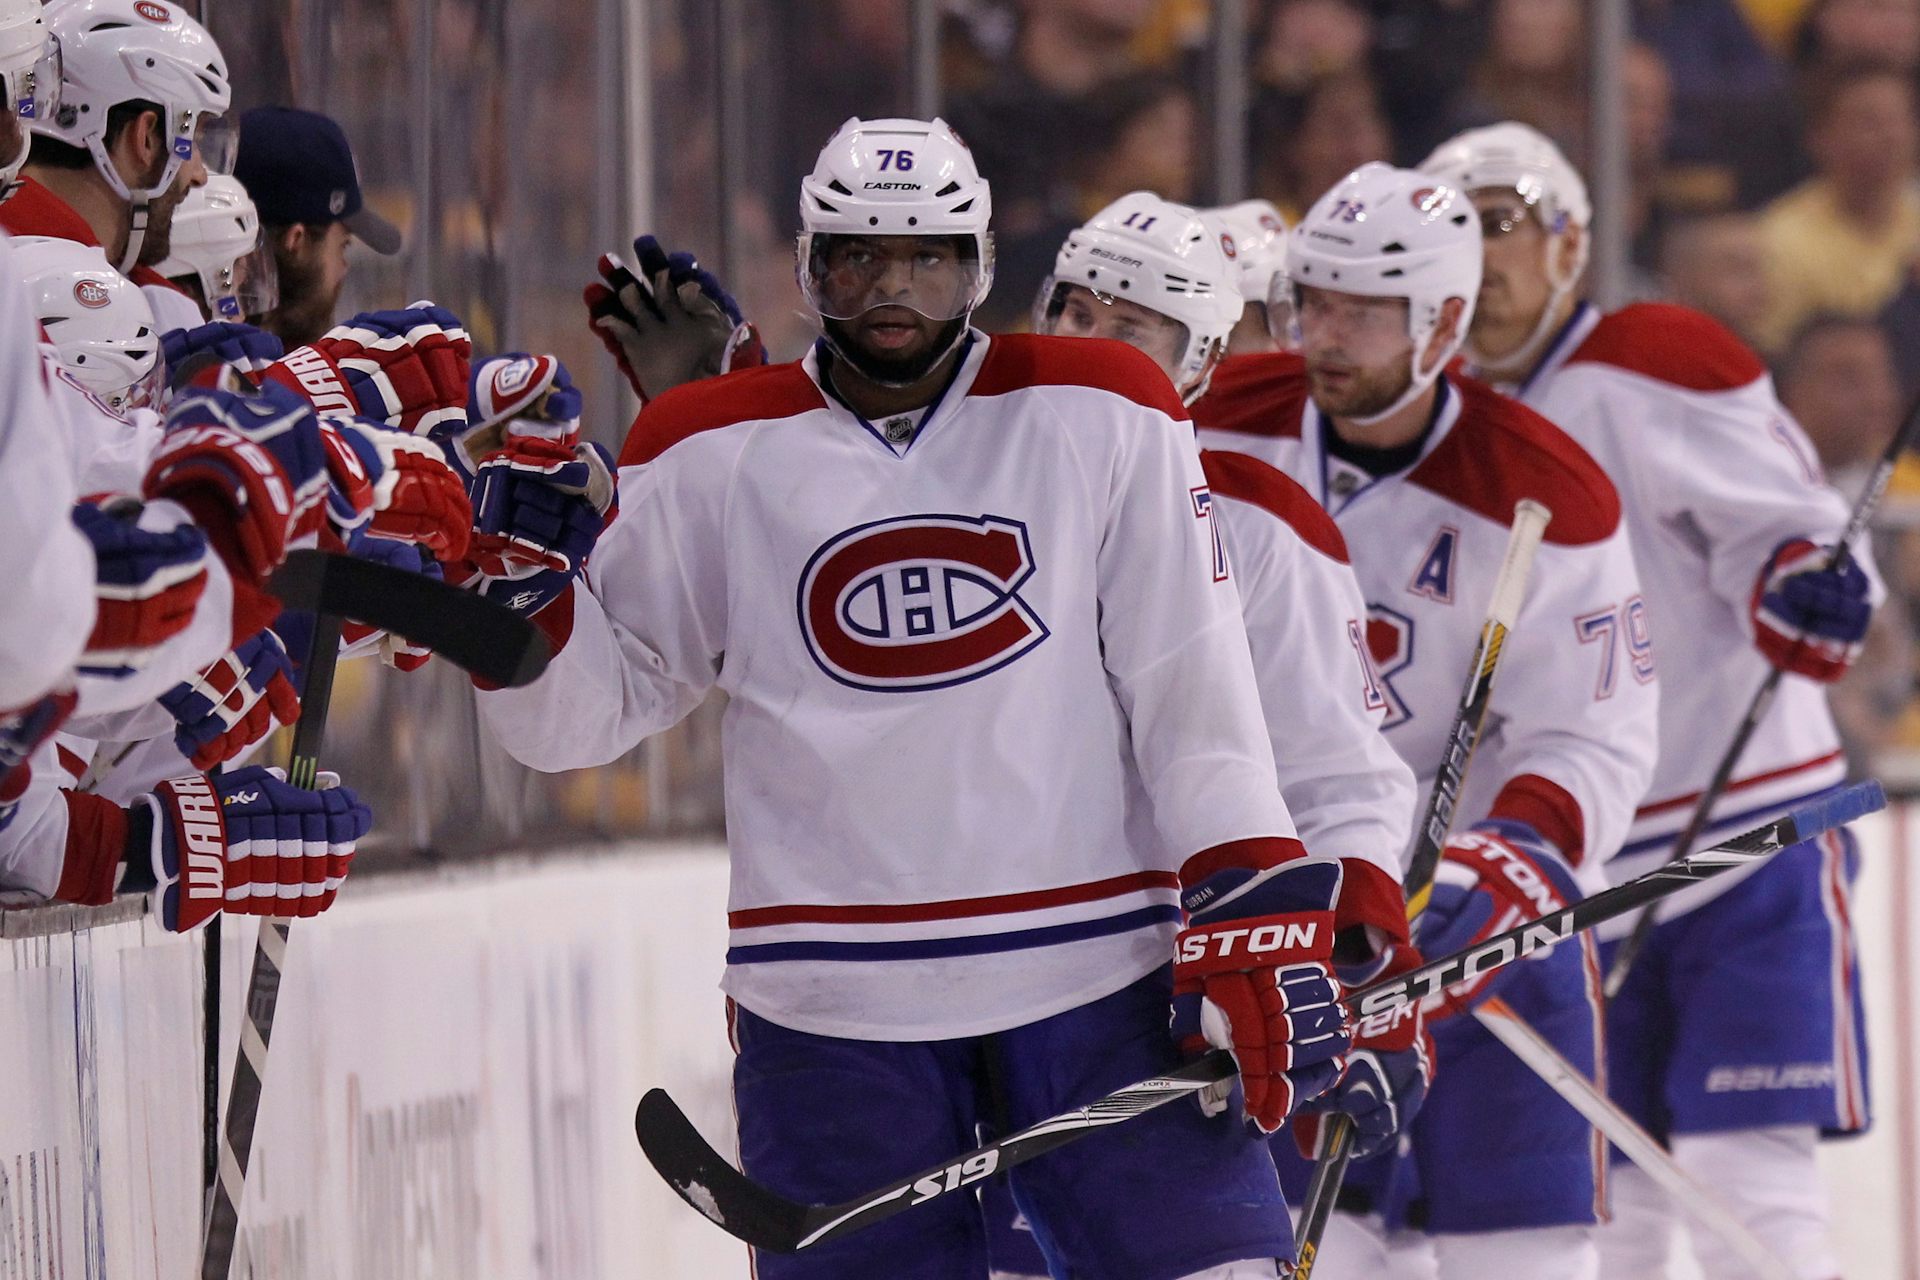 how many black hockey players are in the nhl 2015